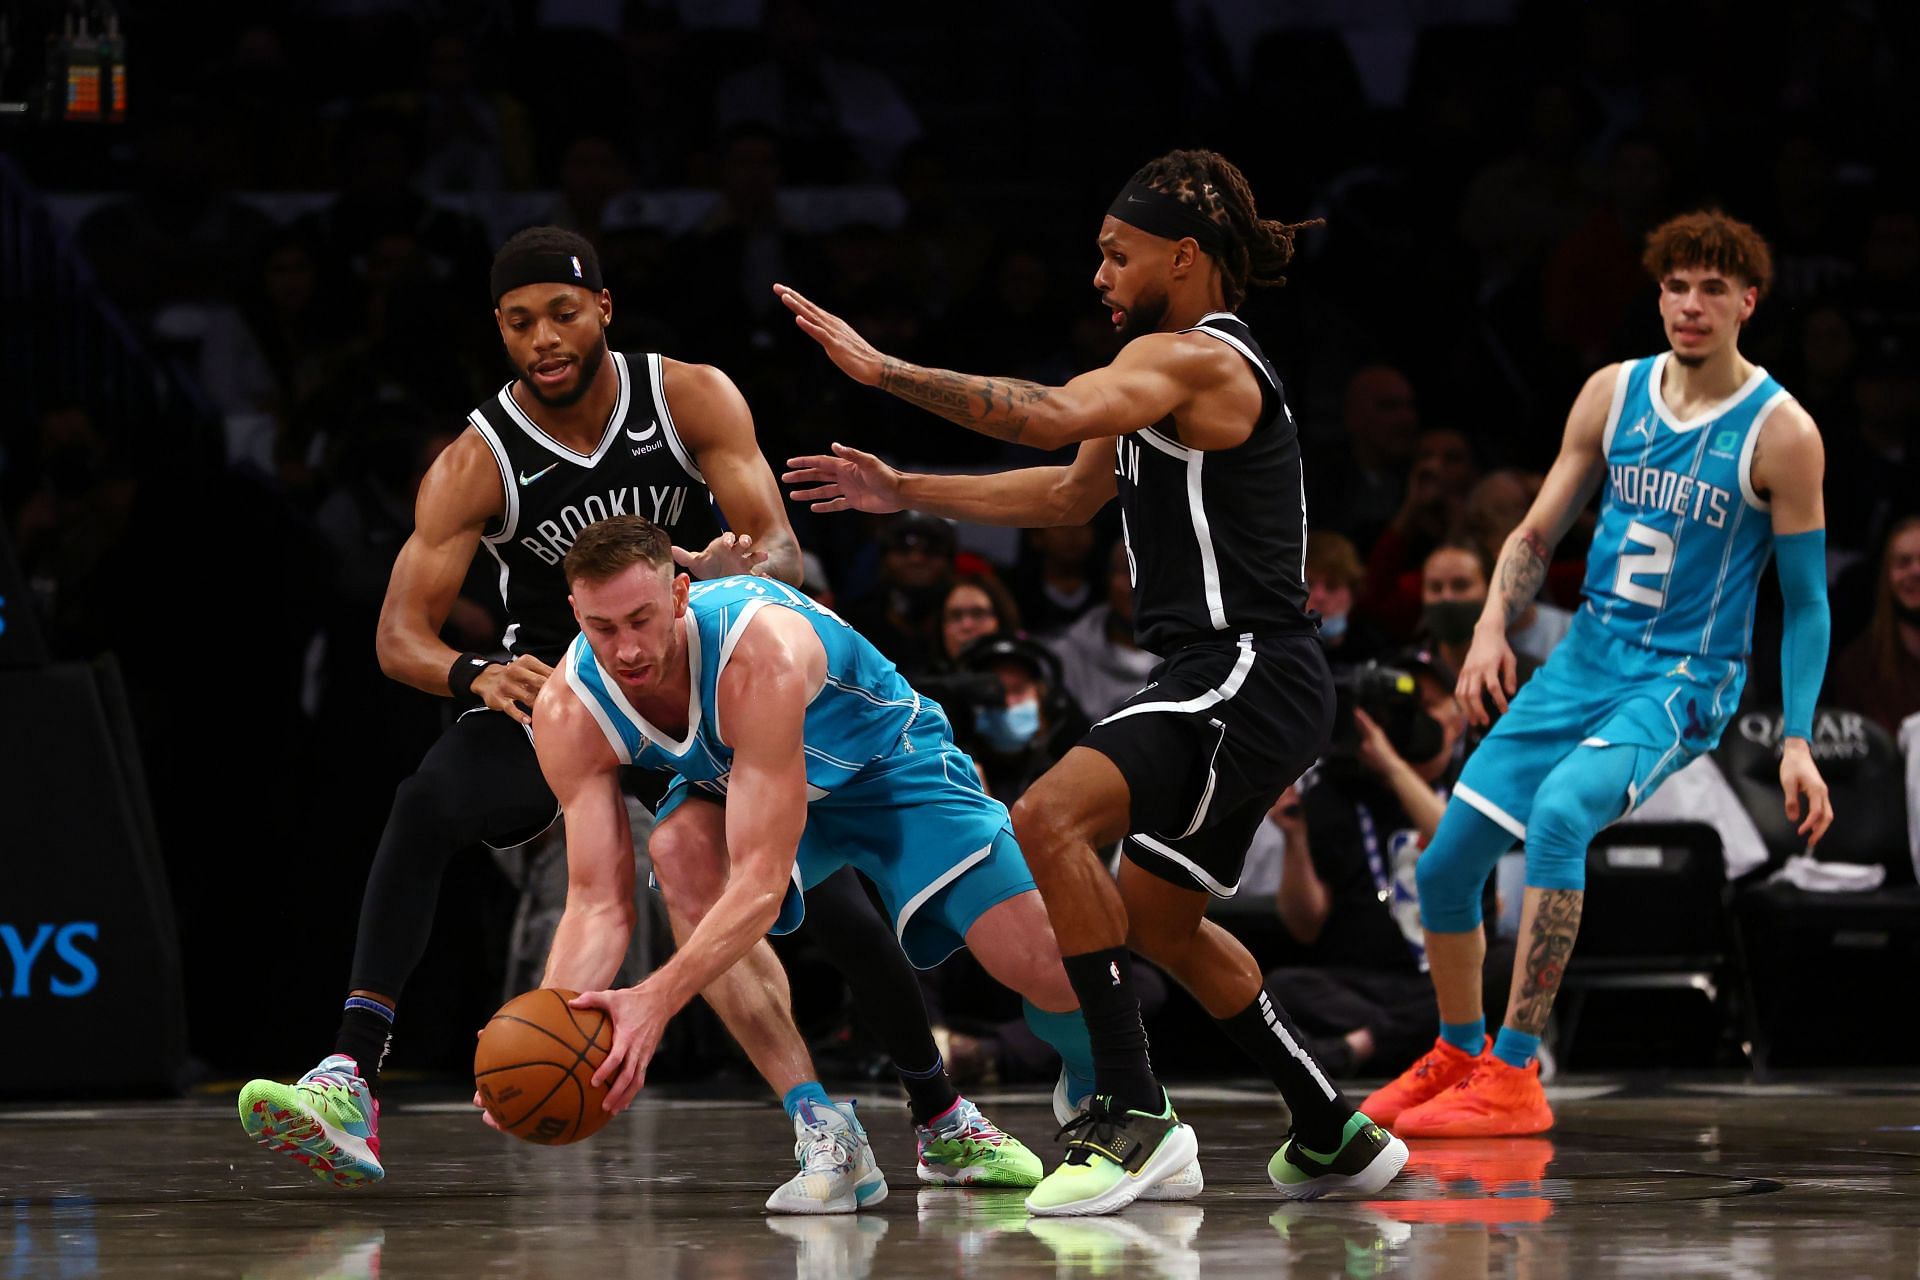 The Charlotte Hornets went 3-0 for the campaign after their 111-95 win against the Brooklyn Nets in their previous outing